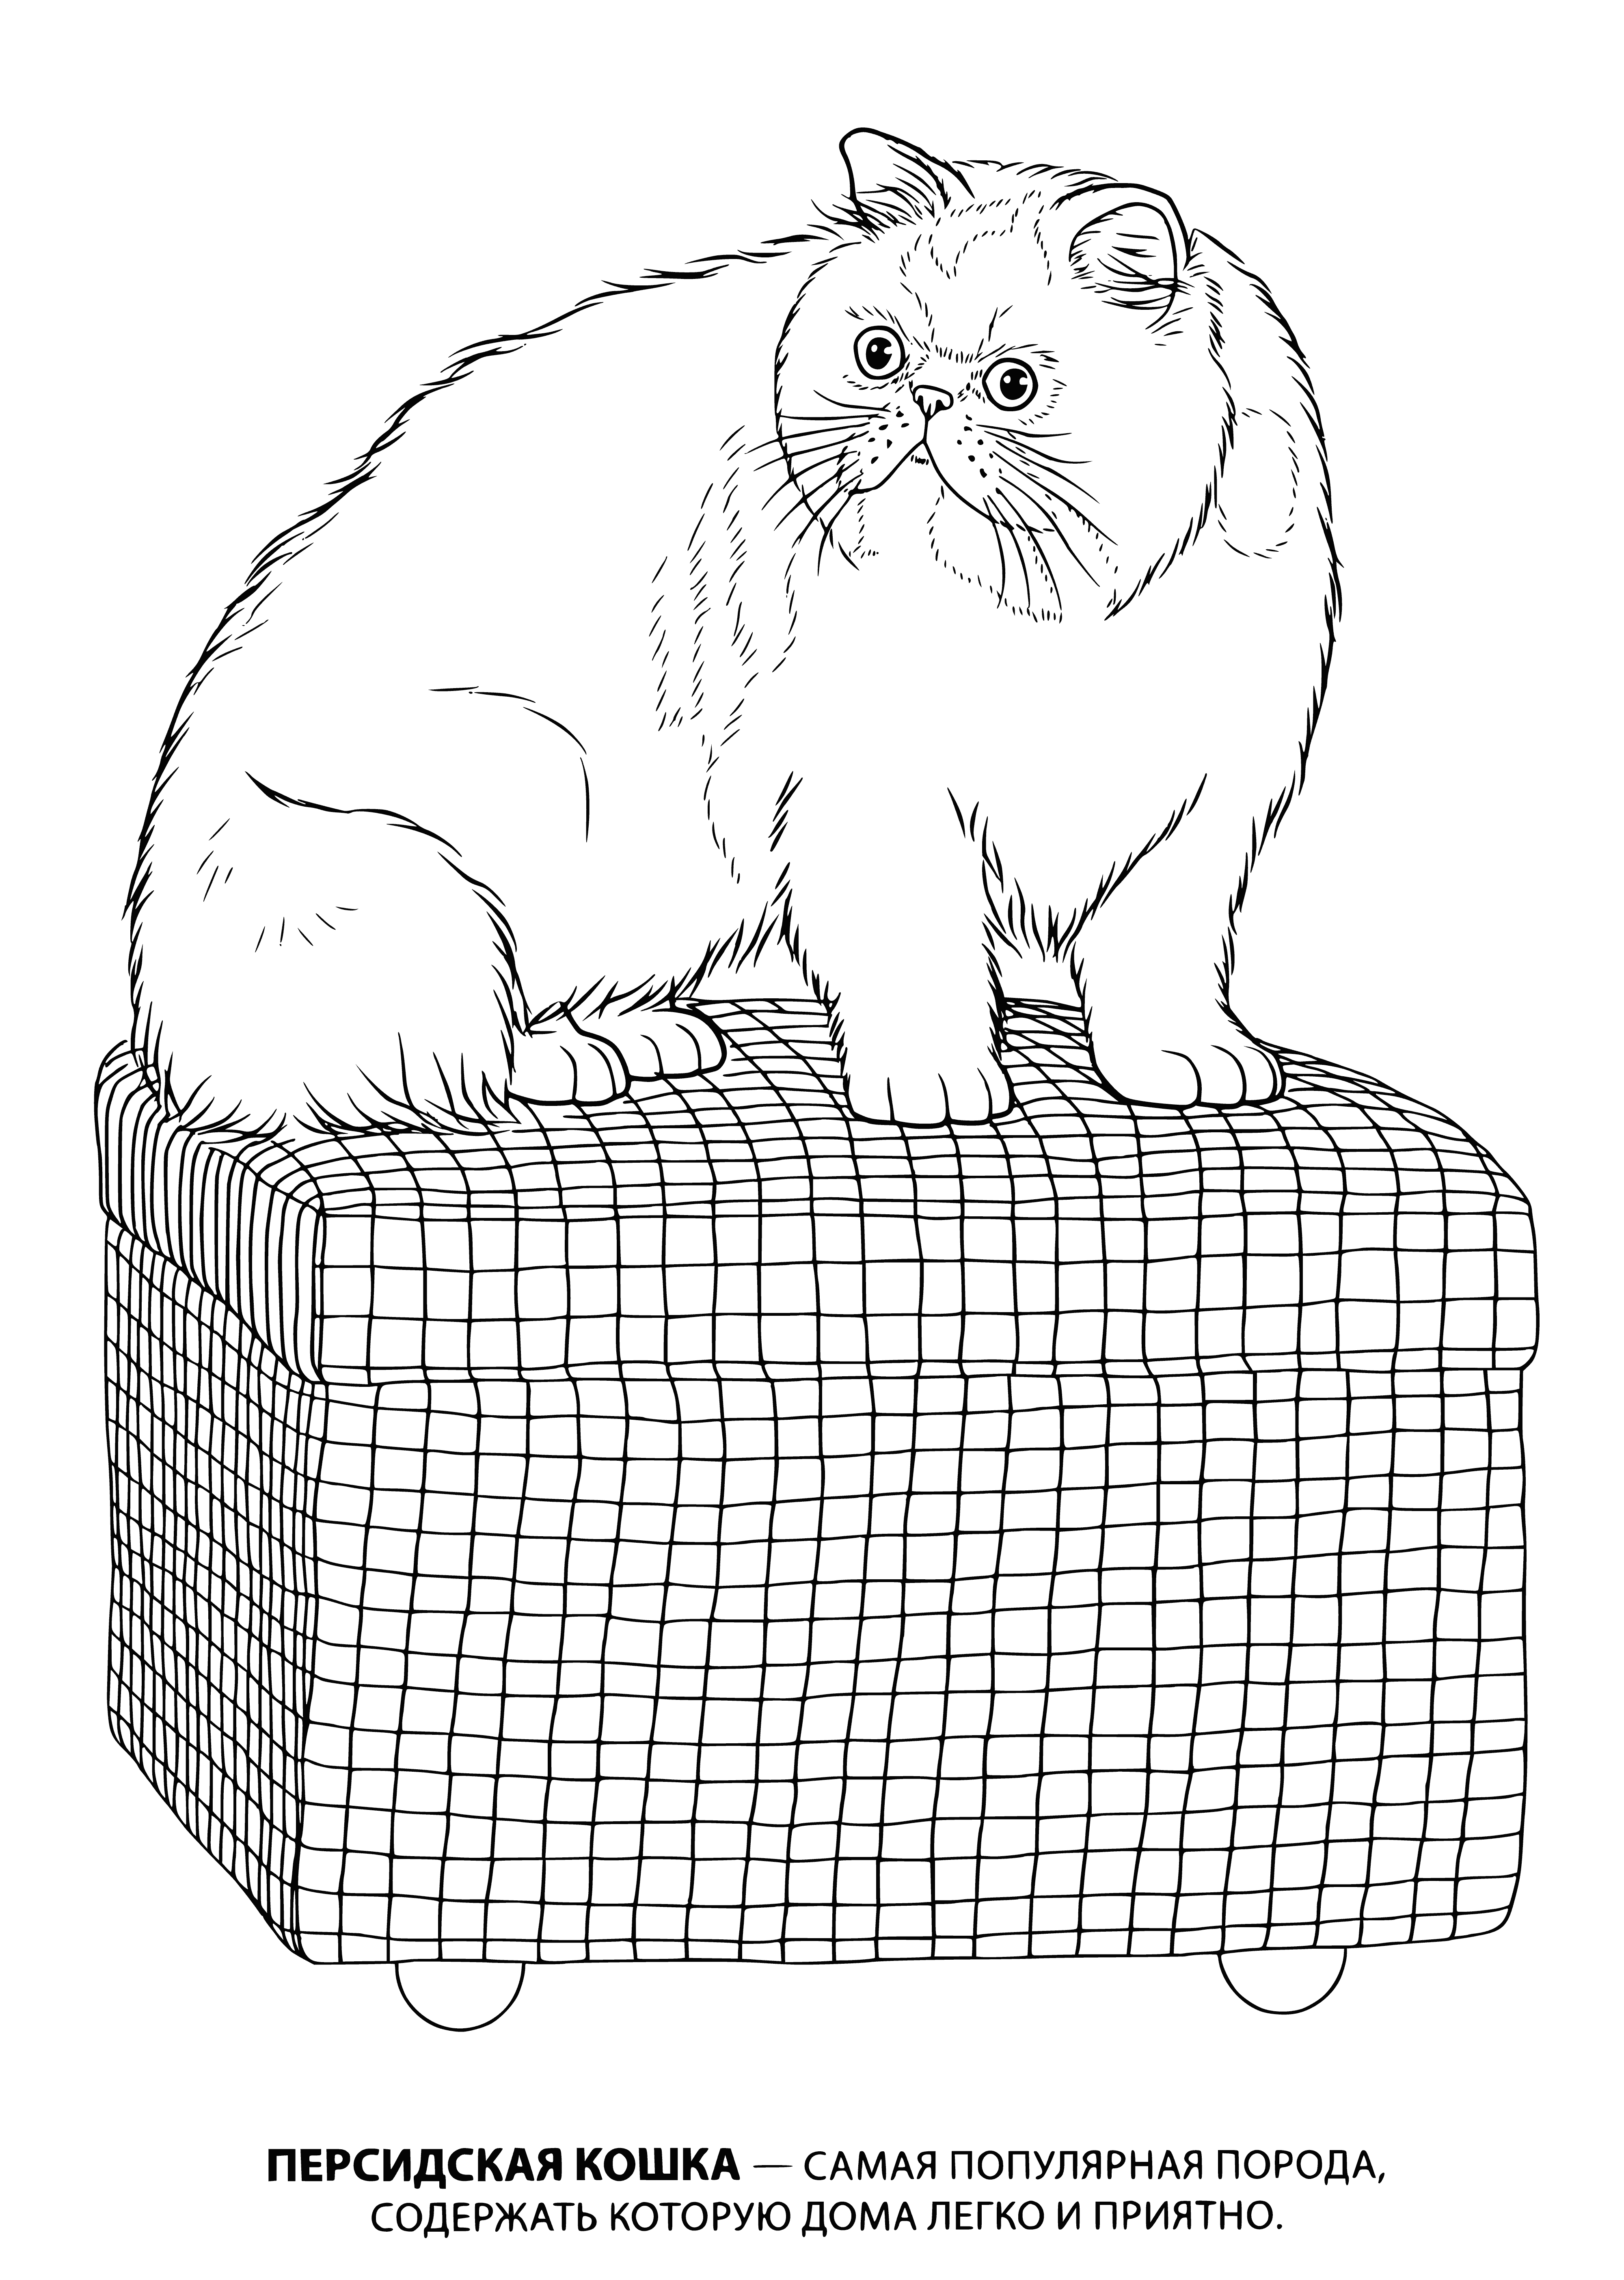 Persian cat coloring page